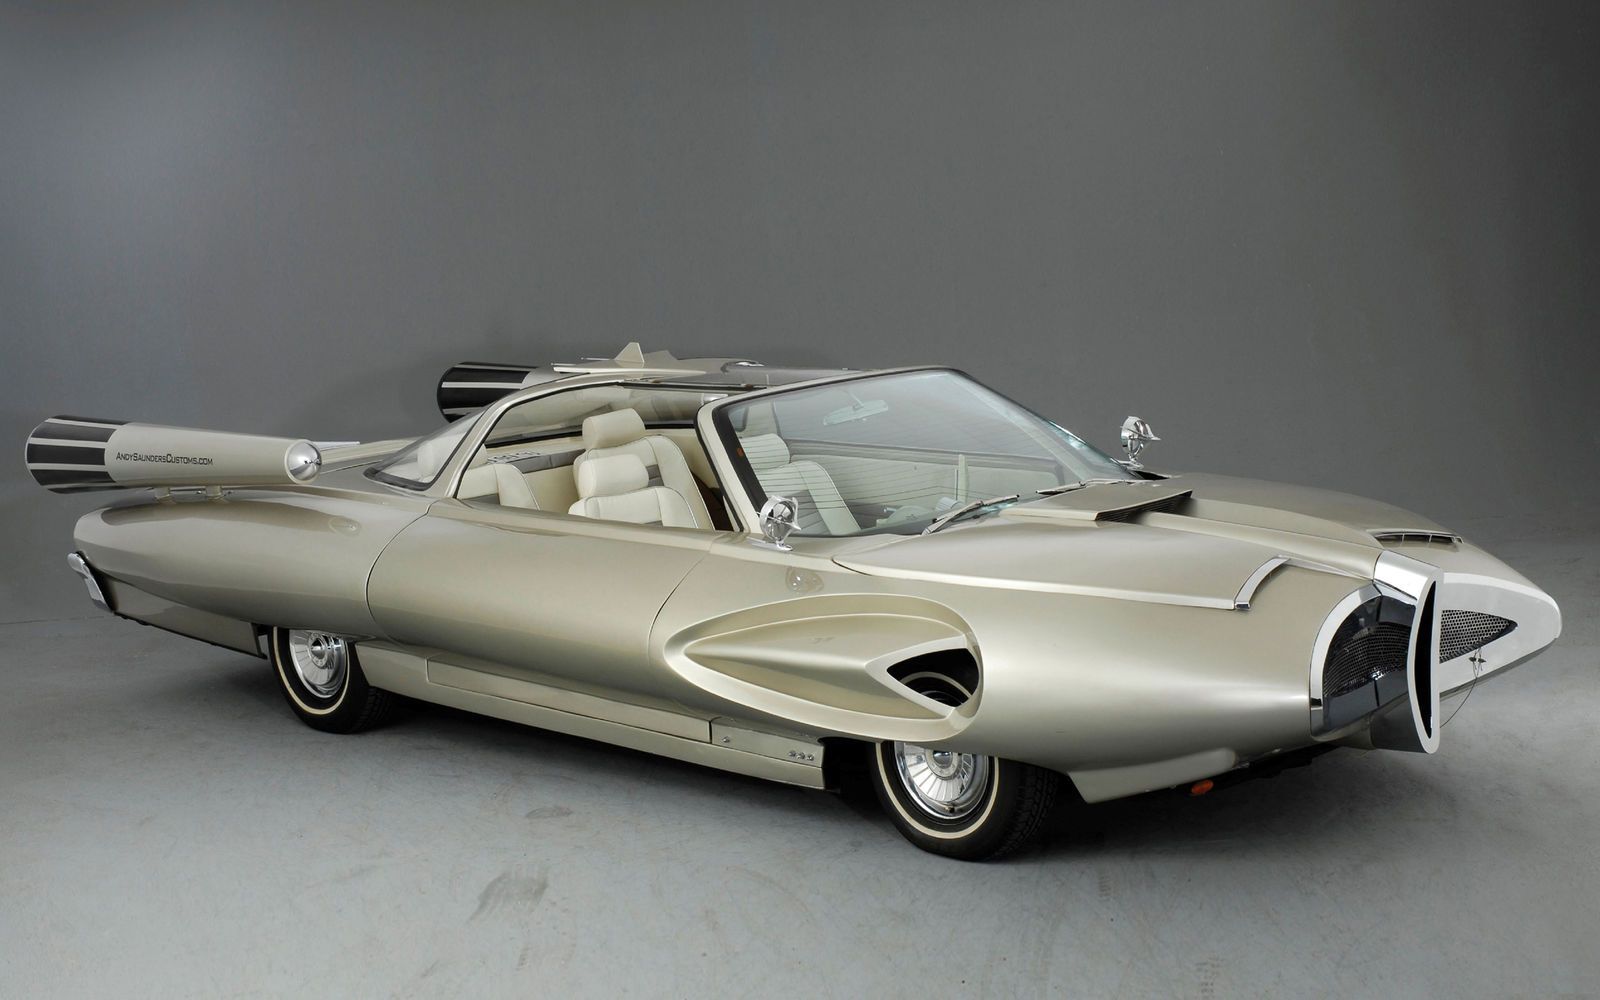 30 incredibly bonkers and beautiful cars from the 1950s to now image 18